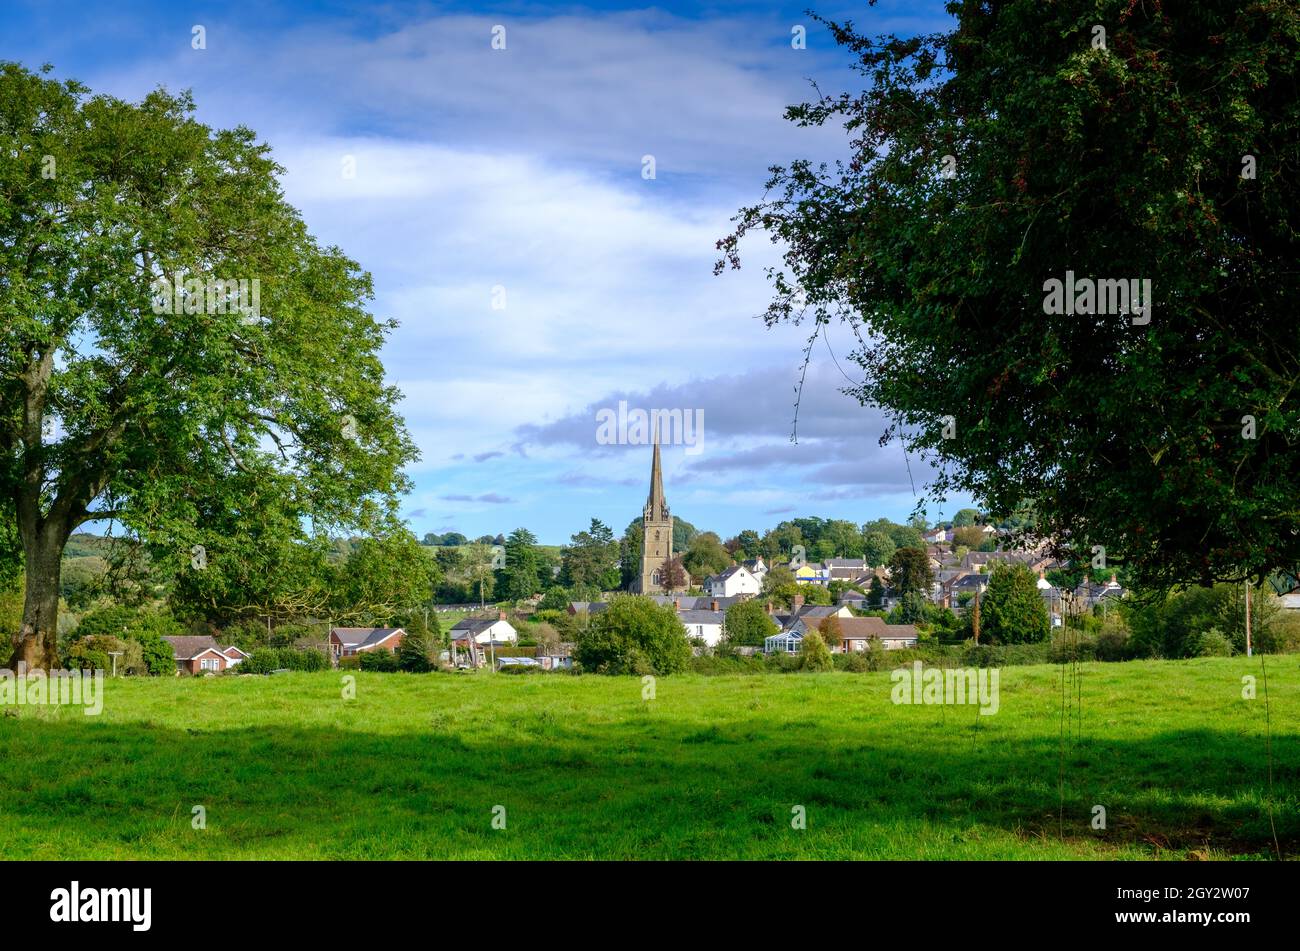 Ruardean village and the Church of Saint John the Baptist spire in the Forest of Dean, Gloucestershire, England, UK. 2021 Stock Photo